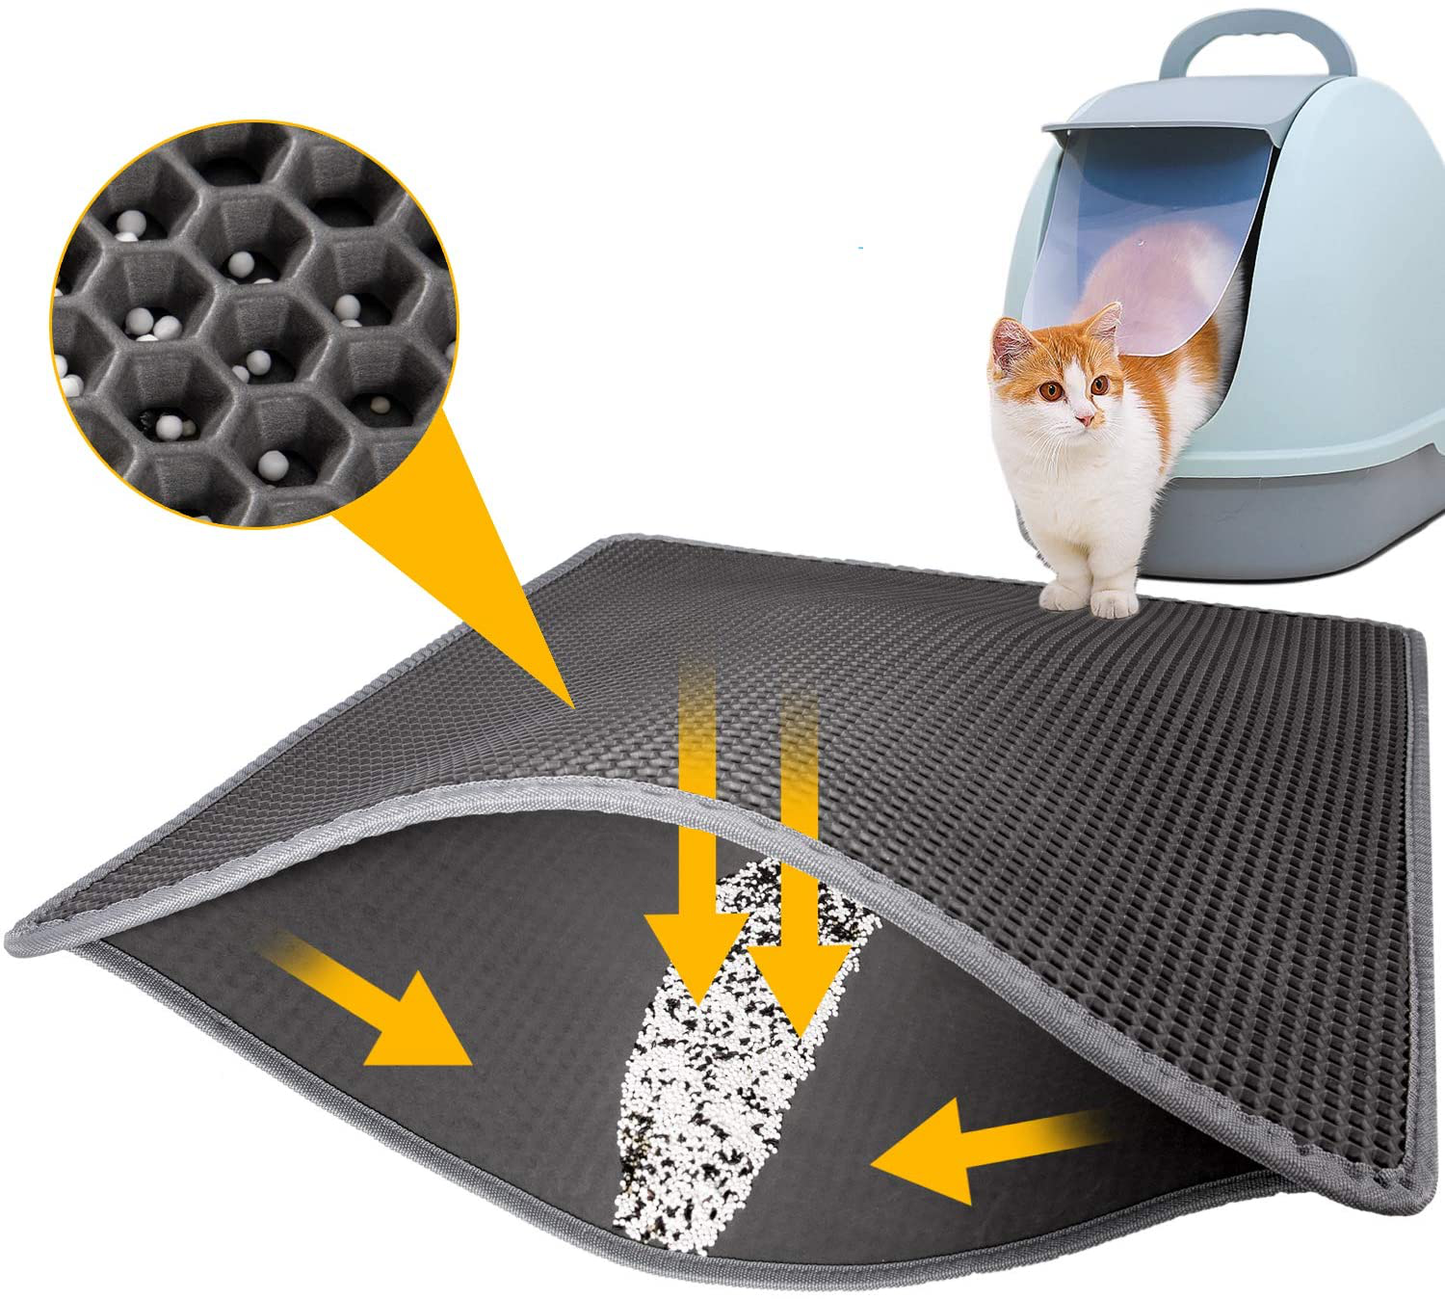 Letoo Cat Litter Mat Trapping for Litter Box, No-Toxic & Super Size, Urine & Waterproof, Honeycomb Double Layer anti Tracking Kitty Mats, No Phthalate, Washable Easy Clean